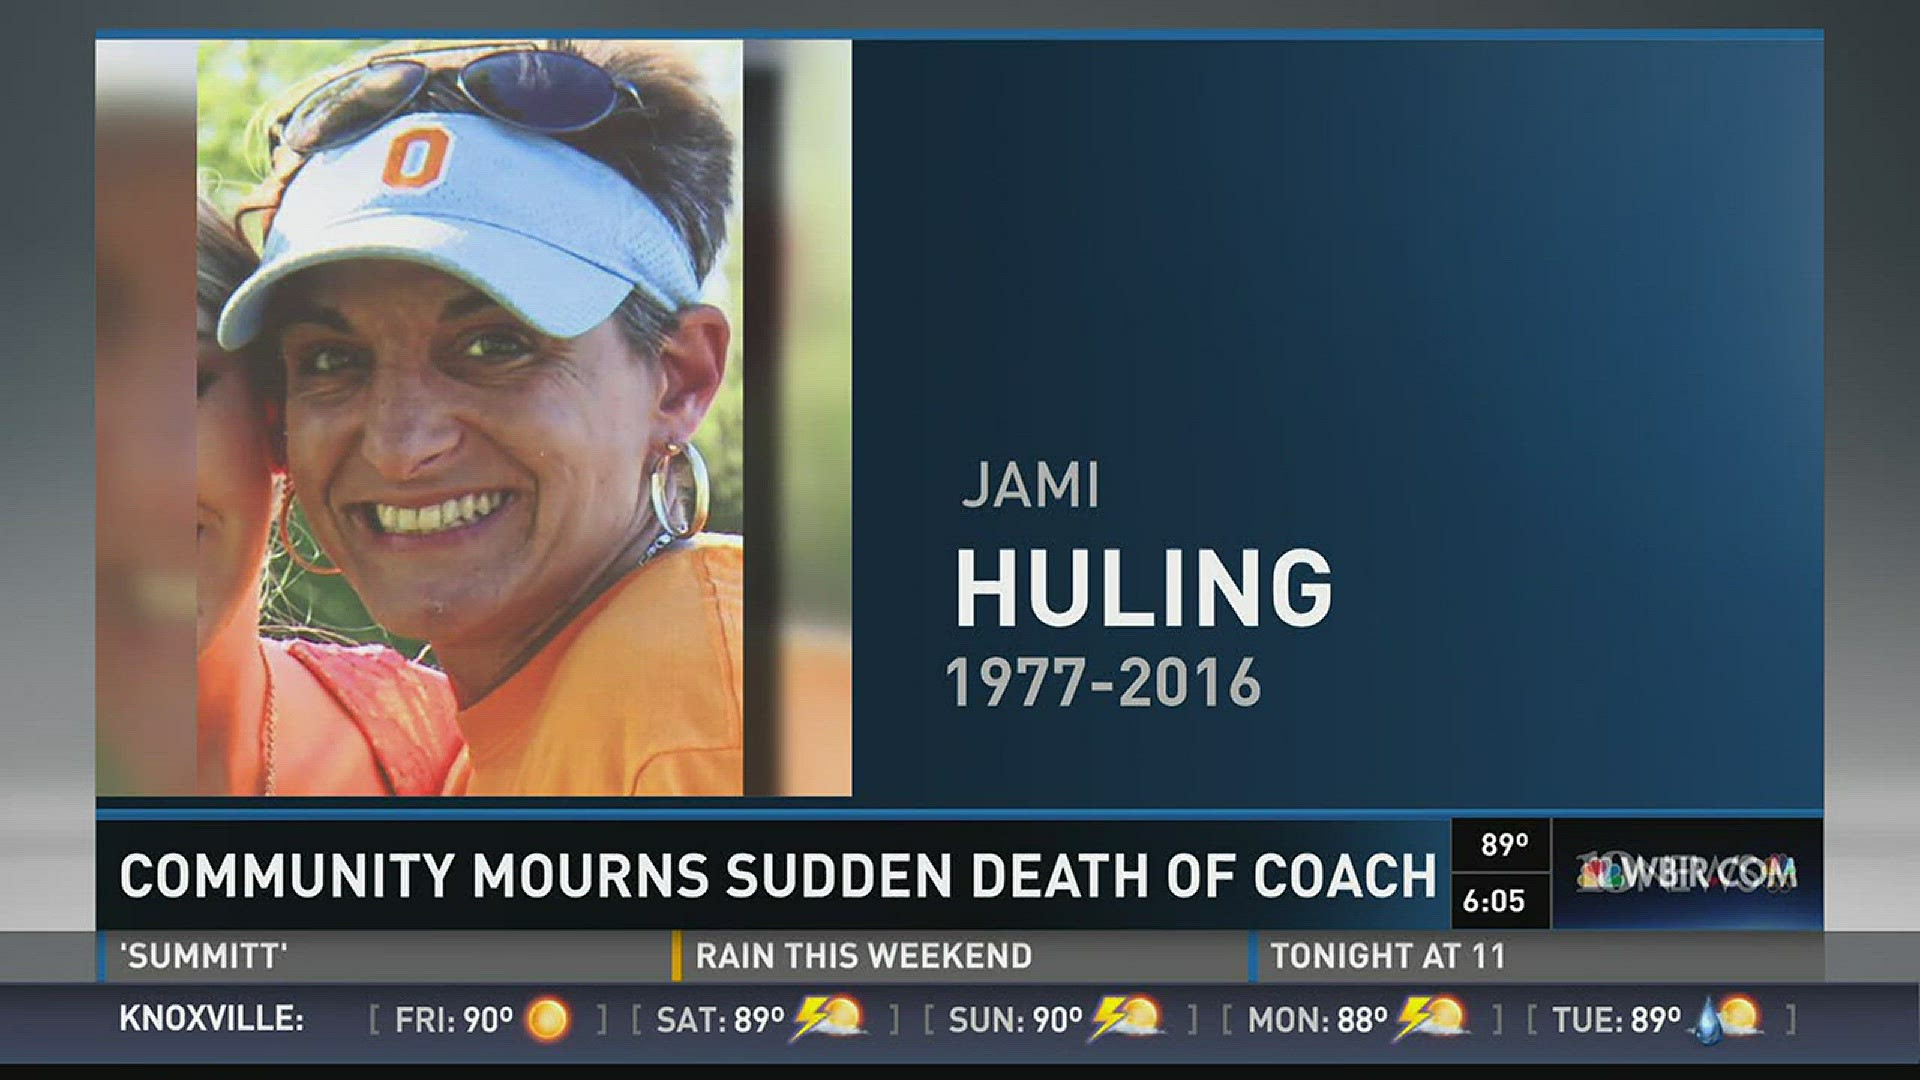 The Oneida community mourns the death of Jami Huling, a beloved coach and teacher who died suddenly at age 39. June 30, 2016.